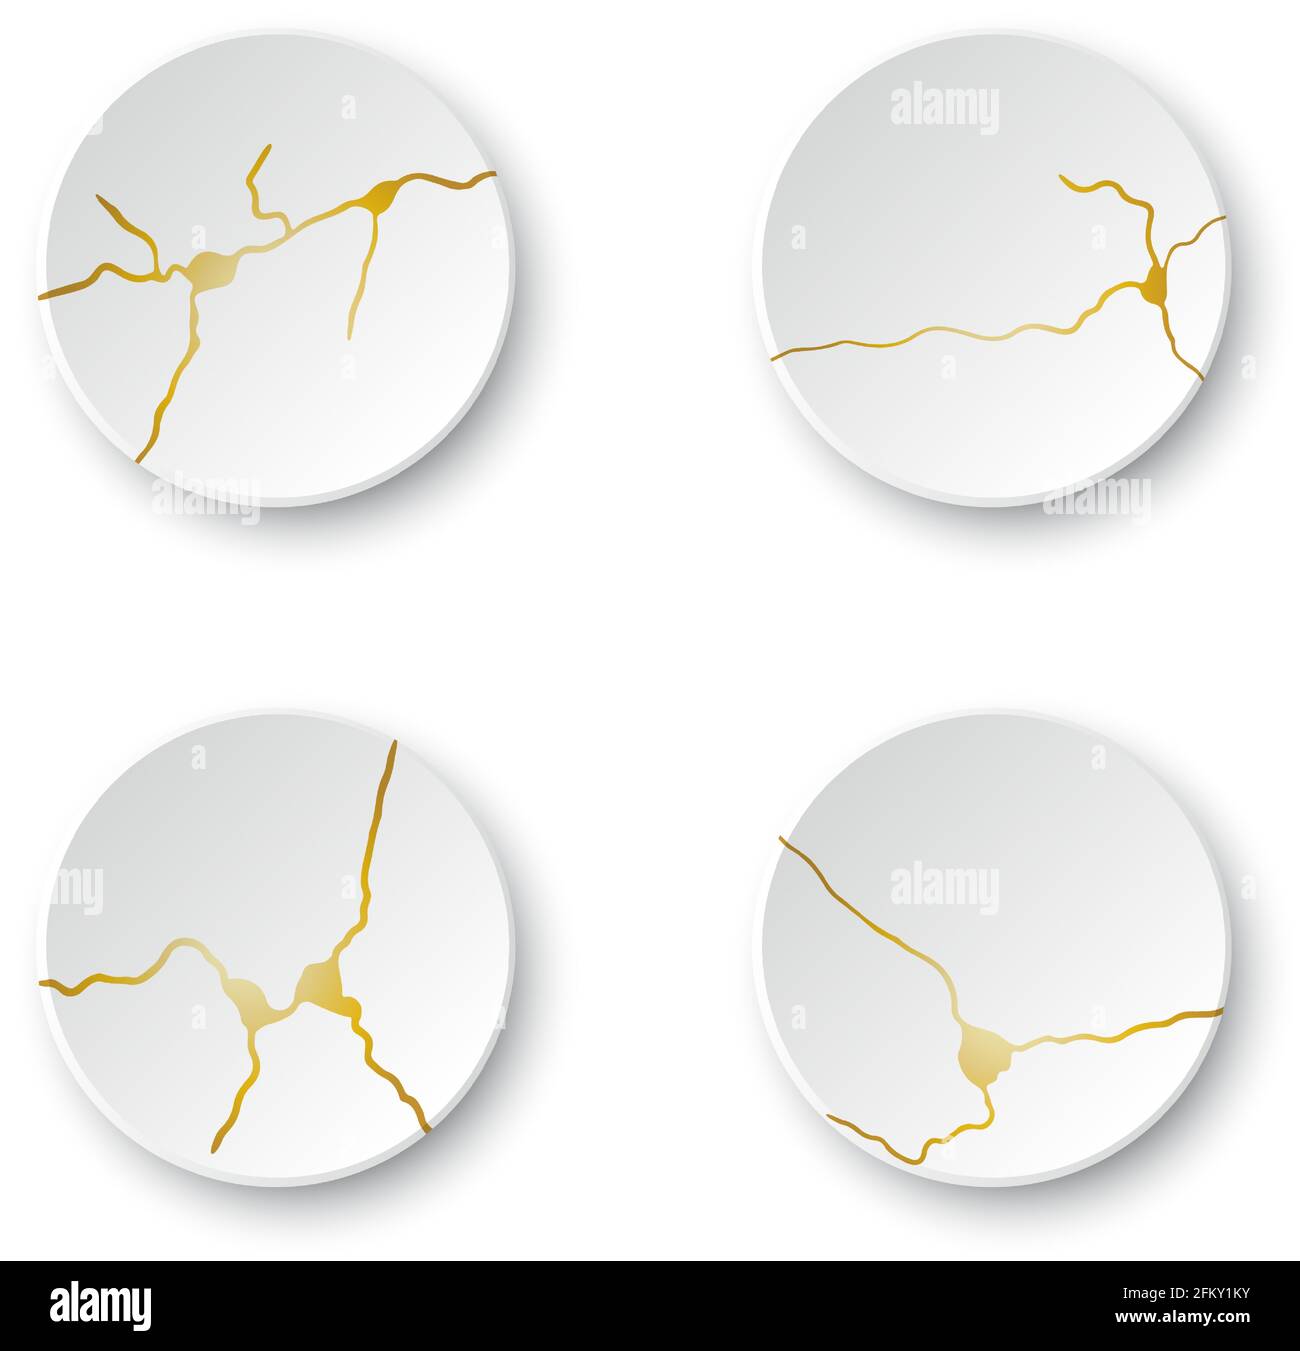 Gold Kintsugi cracks set. Broken and crack effect, craquelure and damaged texture. Vector illustrations can be used for kintsugi decorations, wall Stock Vector